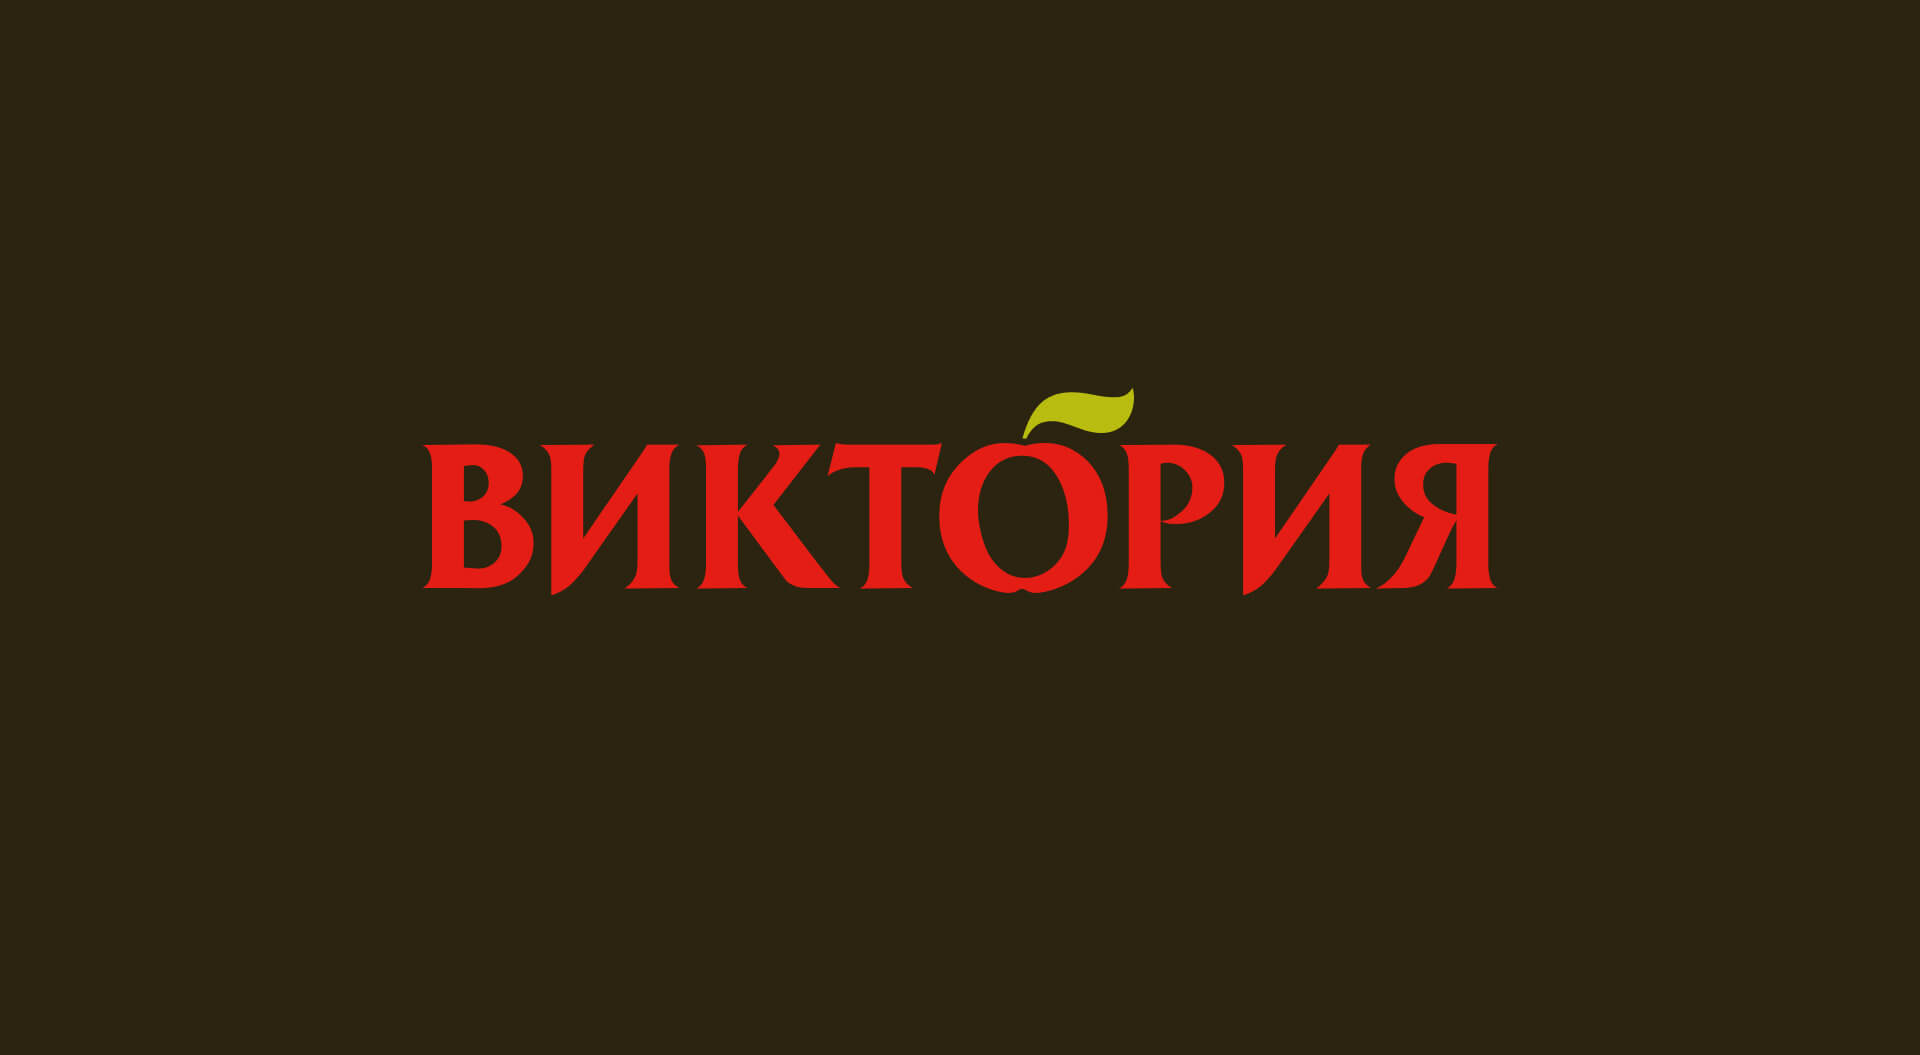 Victoria supermarkets Russian stores brand identity on shopping bags